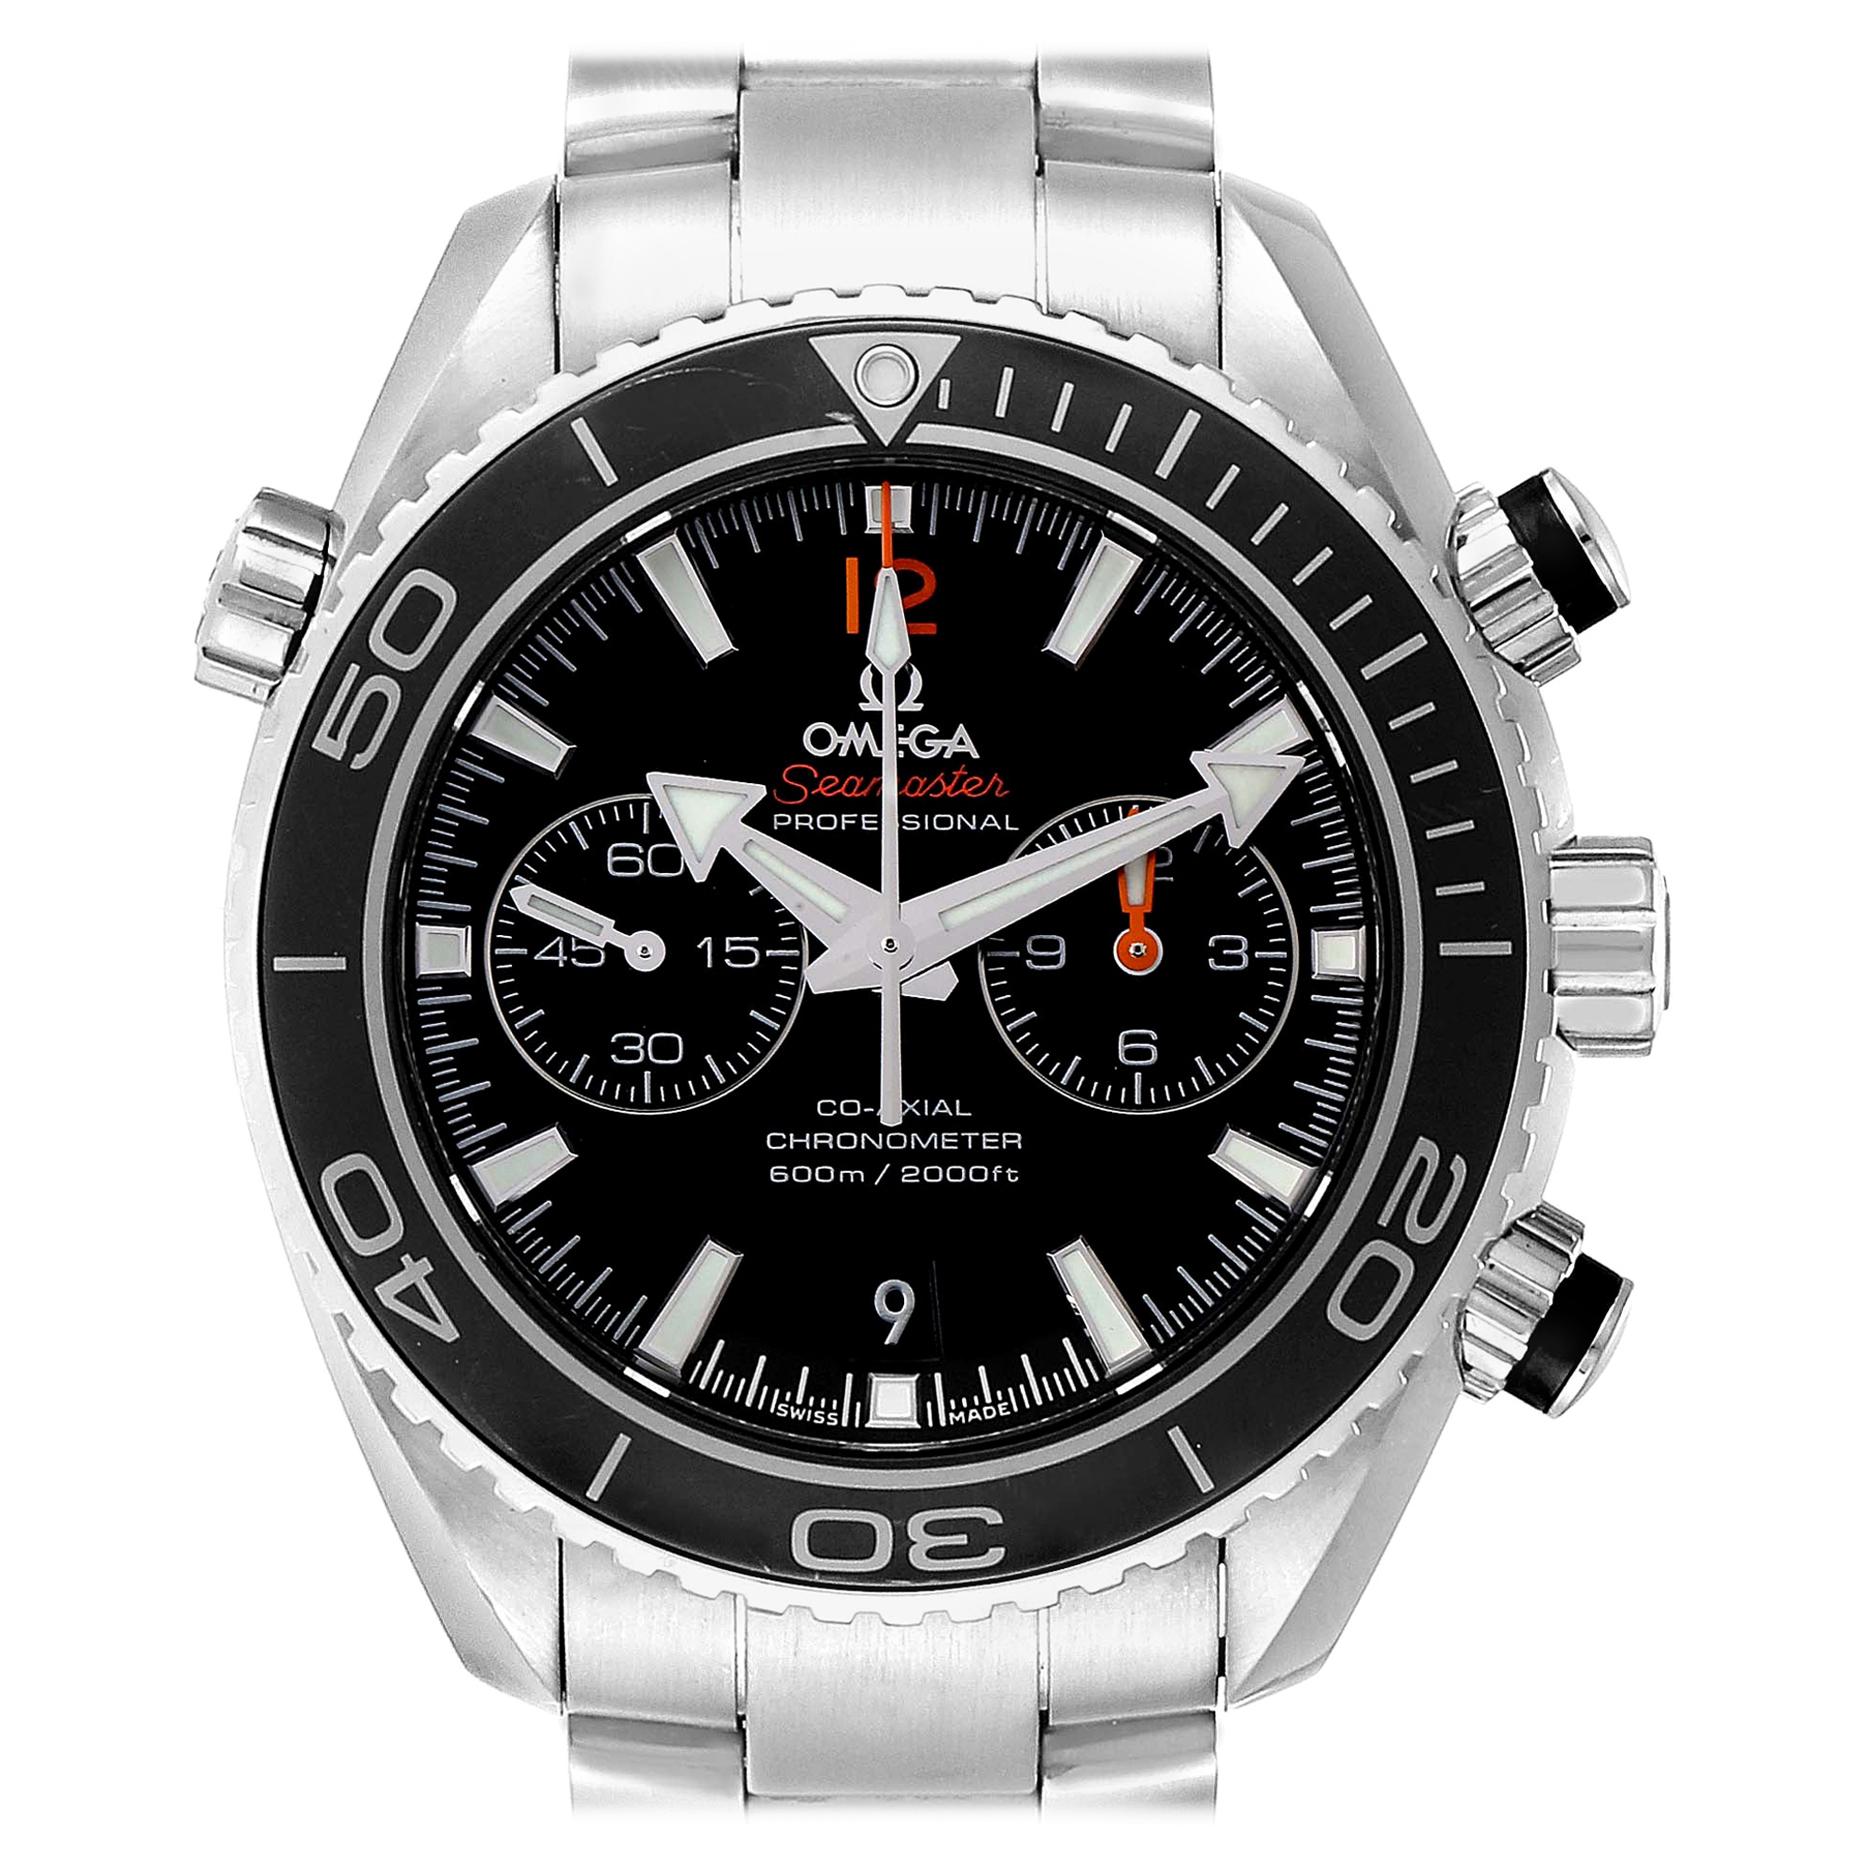 Omega Seamaster Planet Ocean Men's Watch 232.30.46.51.01.003 Box Card For Sale